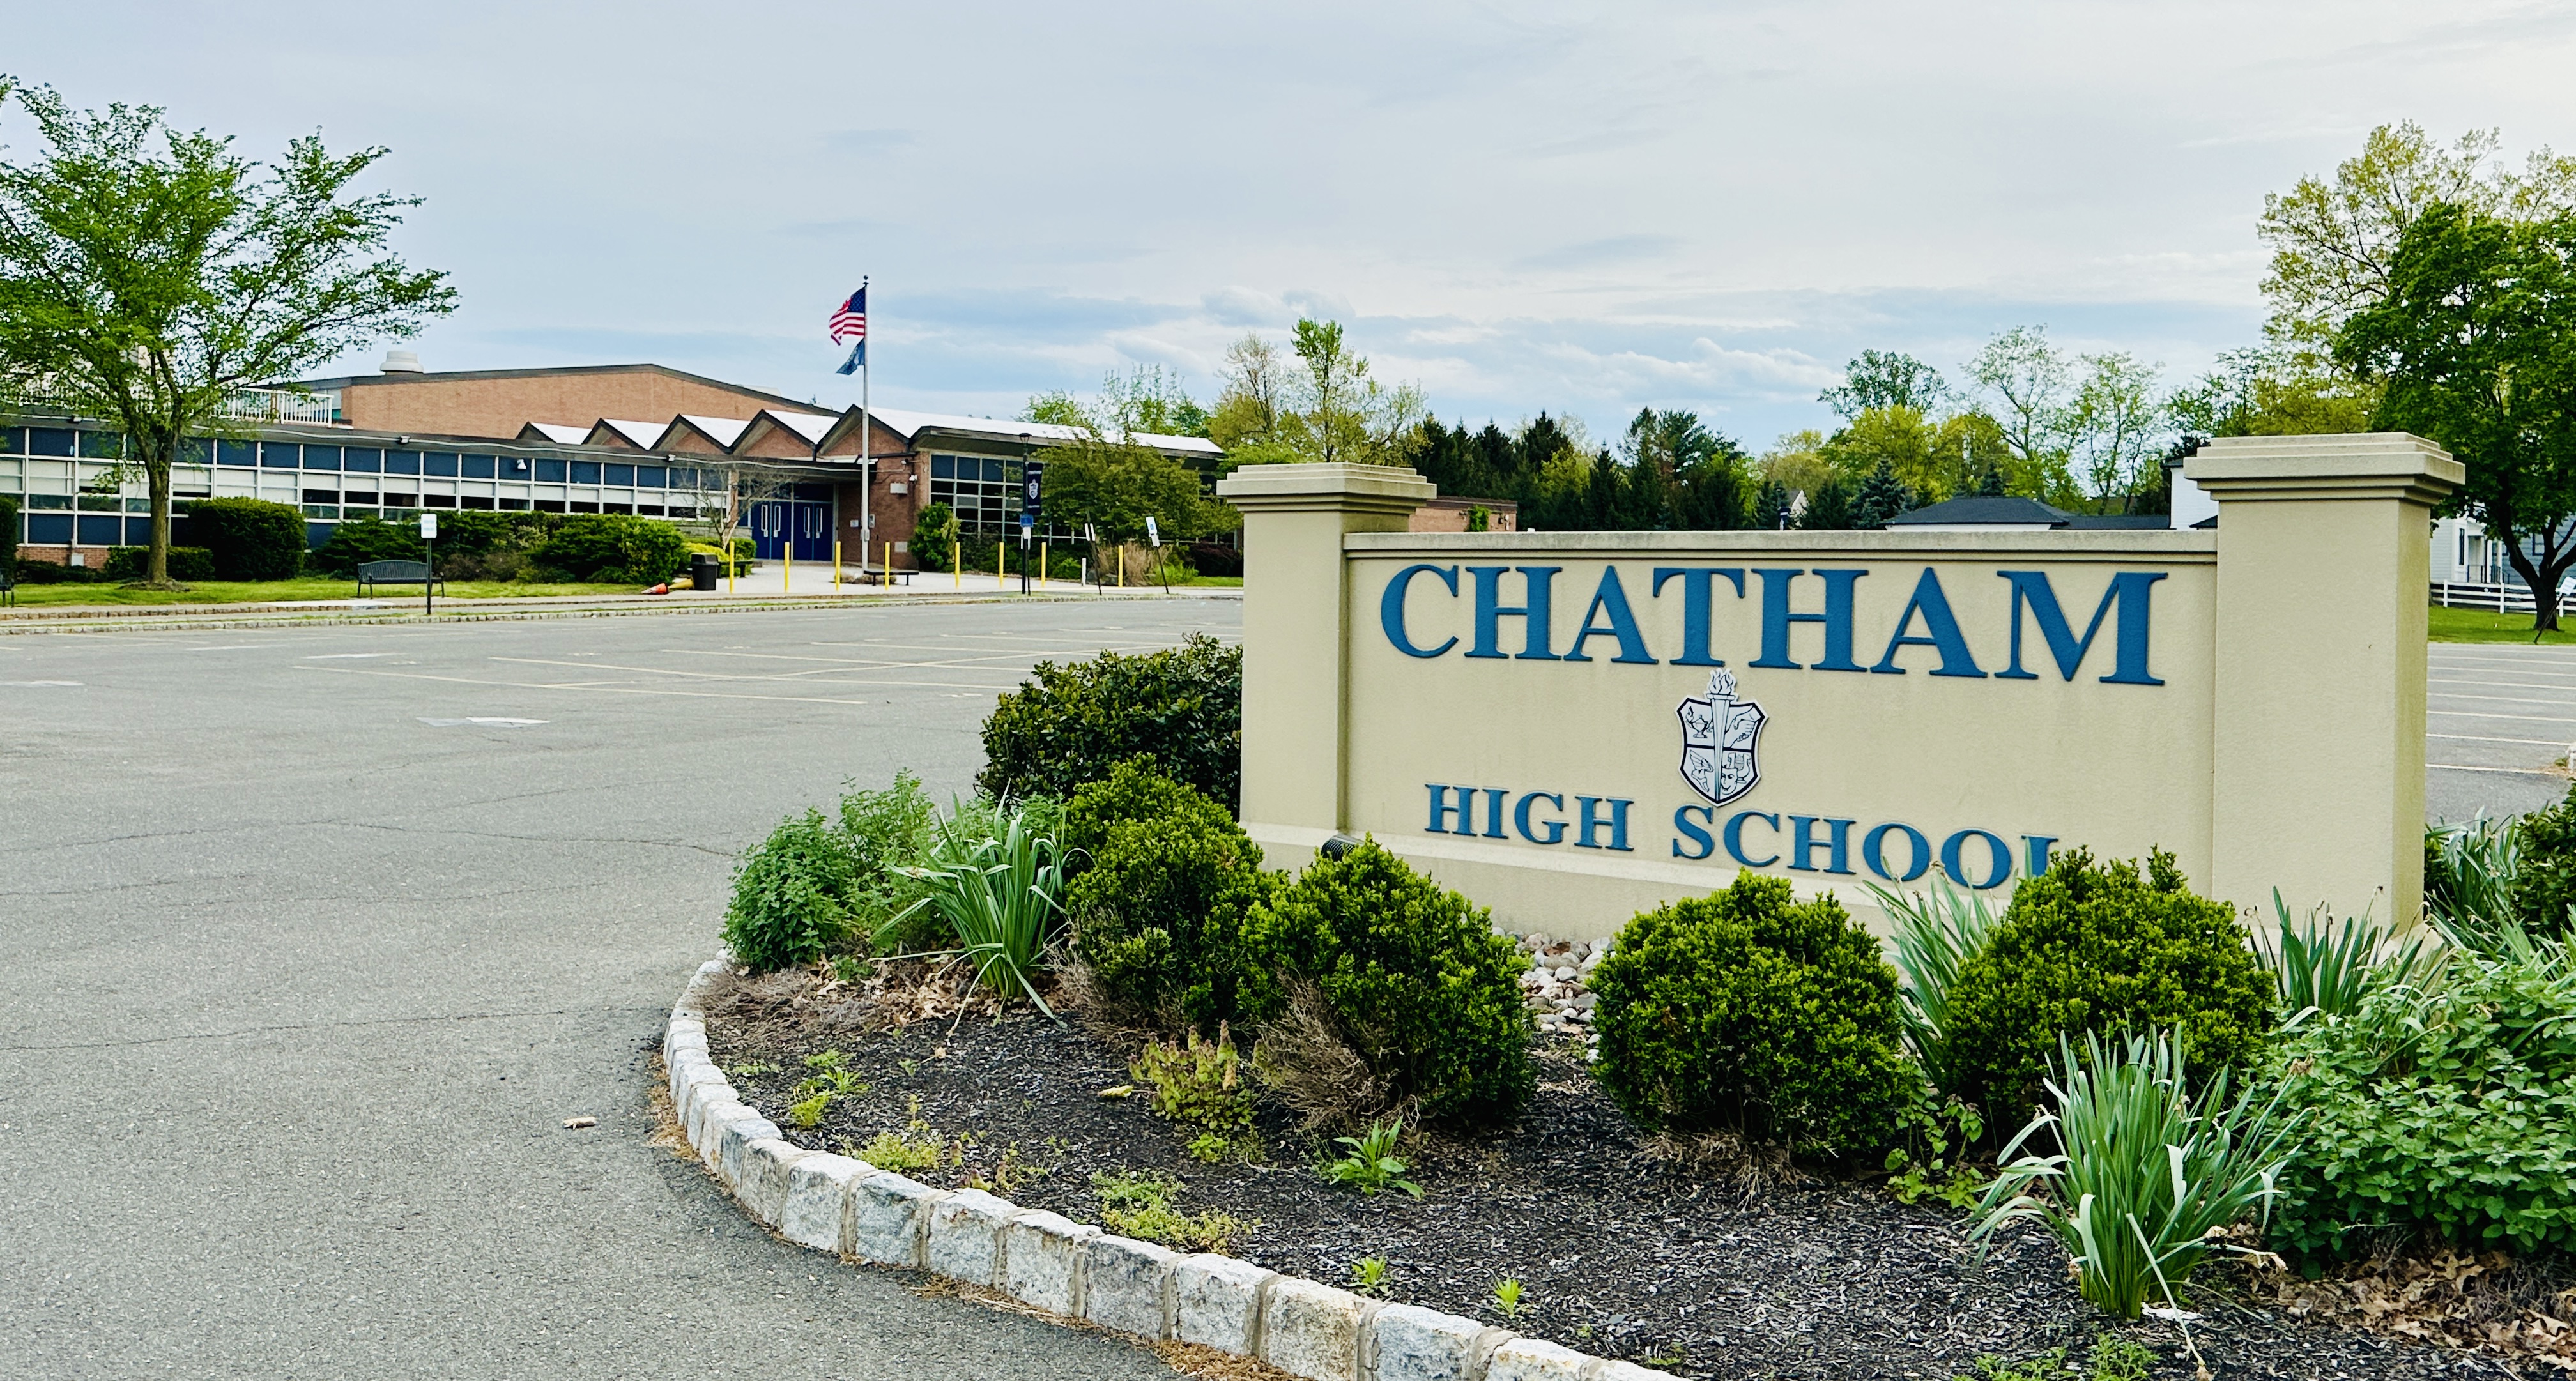 Chatham High School Building and Sign 